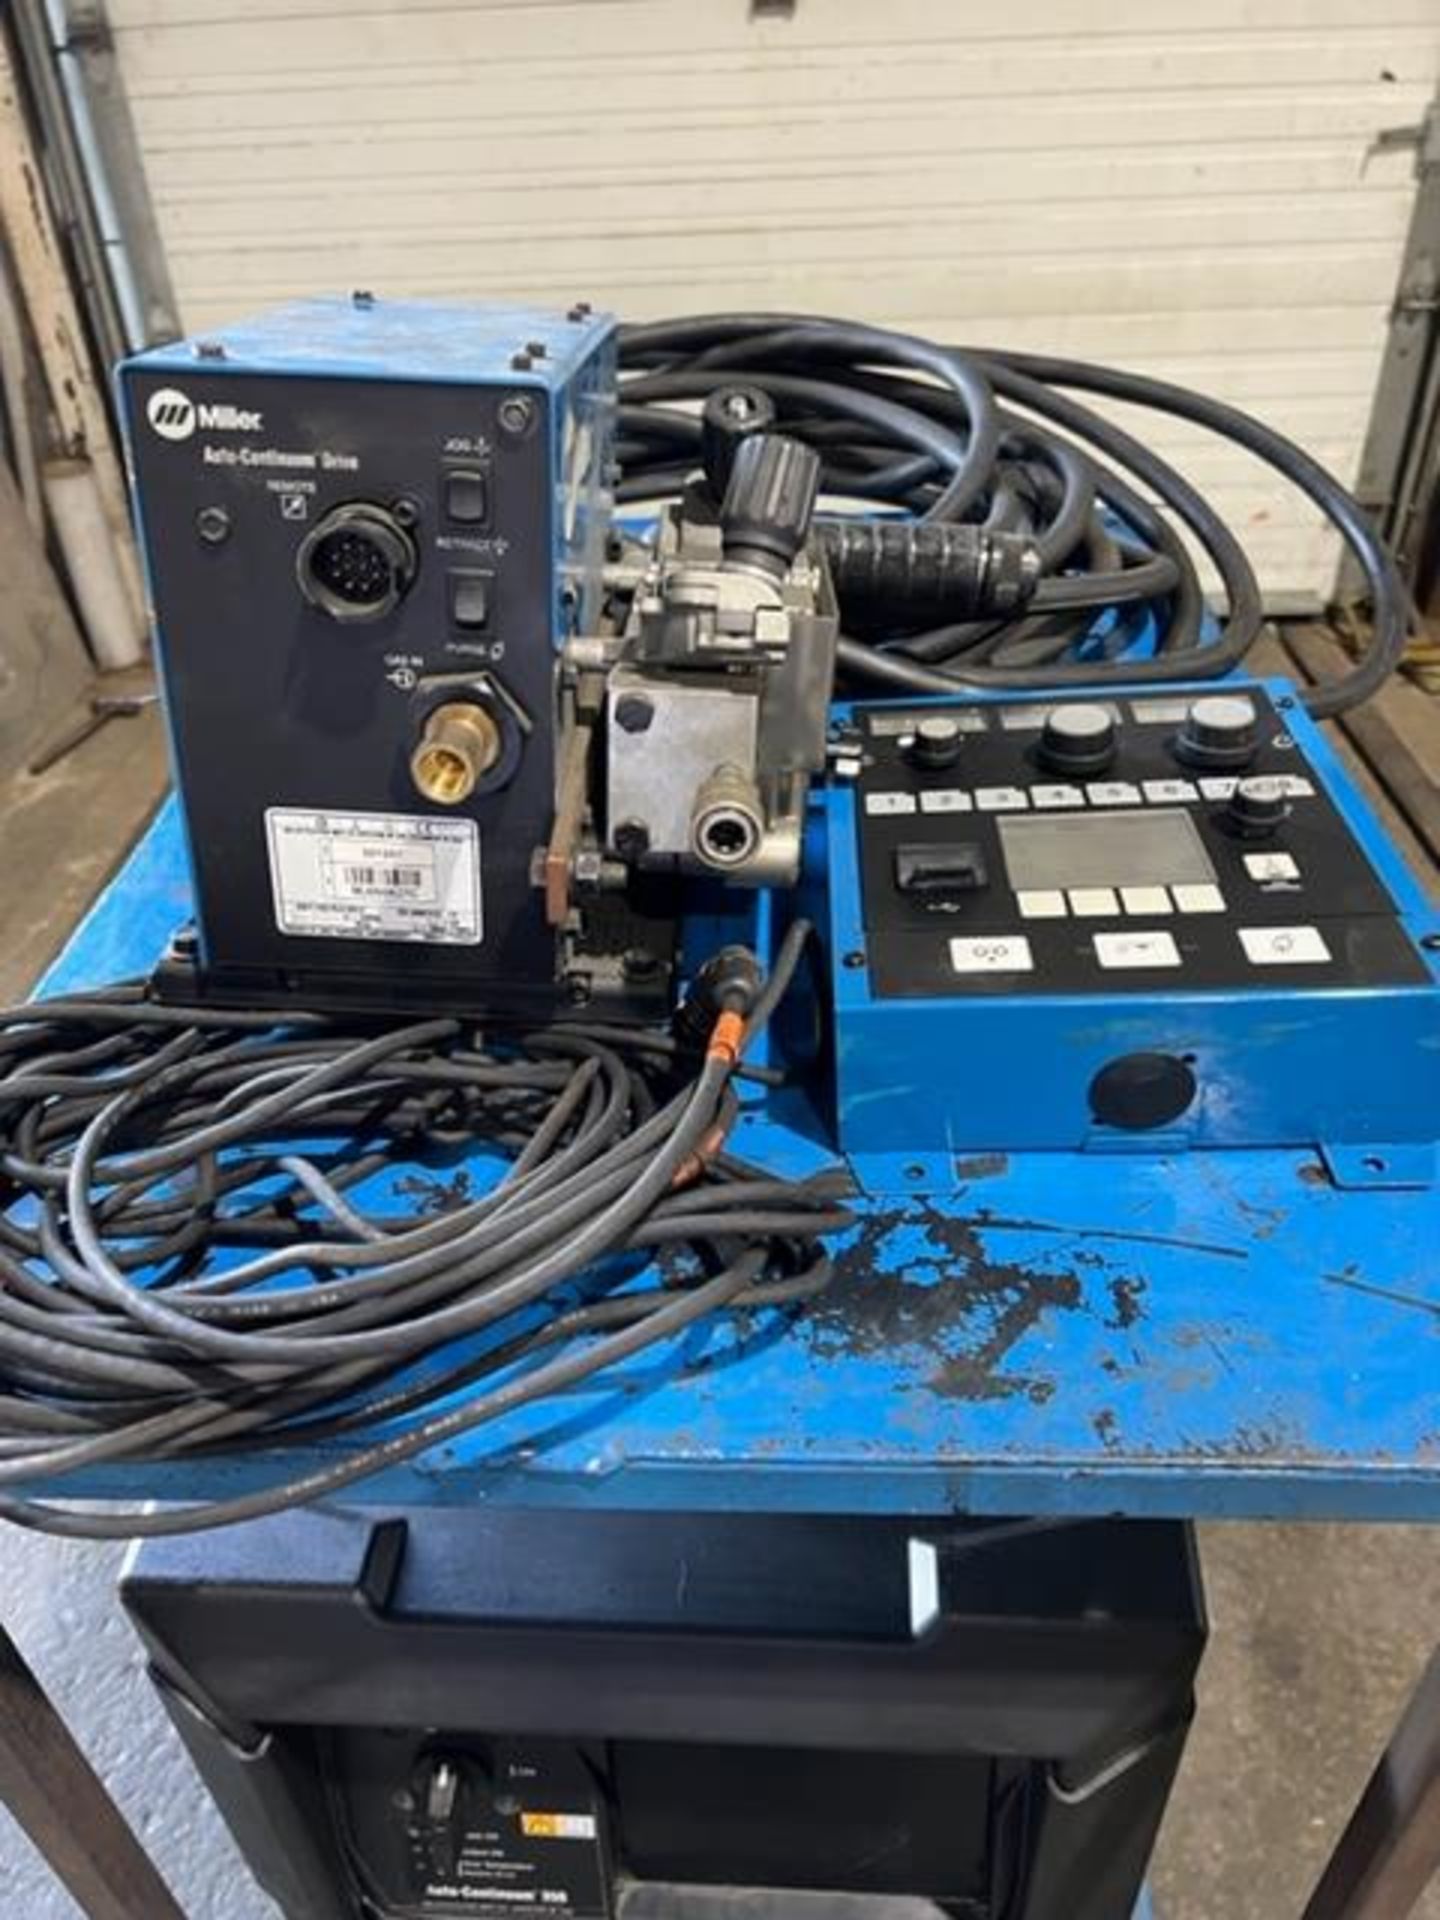 2018 Miller Auto-Continuum 350 Mig Welder - Robotic and manual 350amp on cart with Accessories - Image 3 of 6